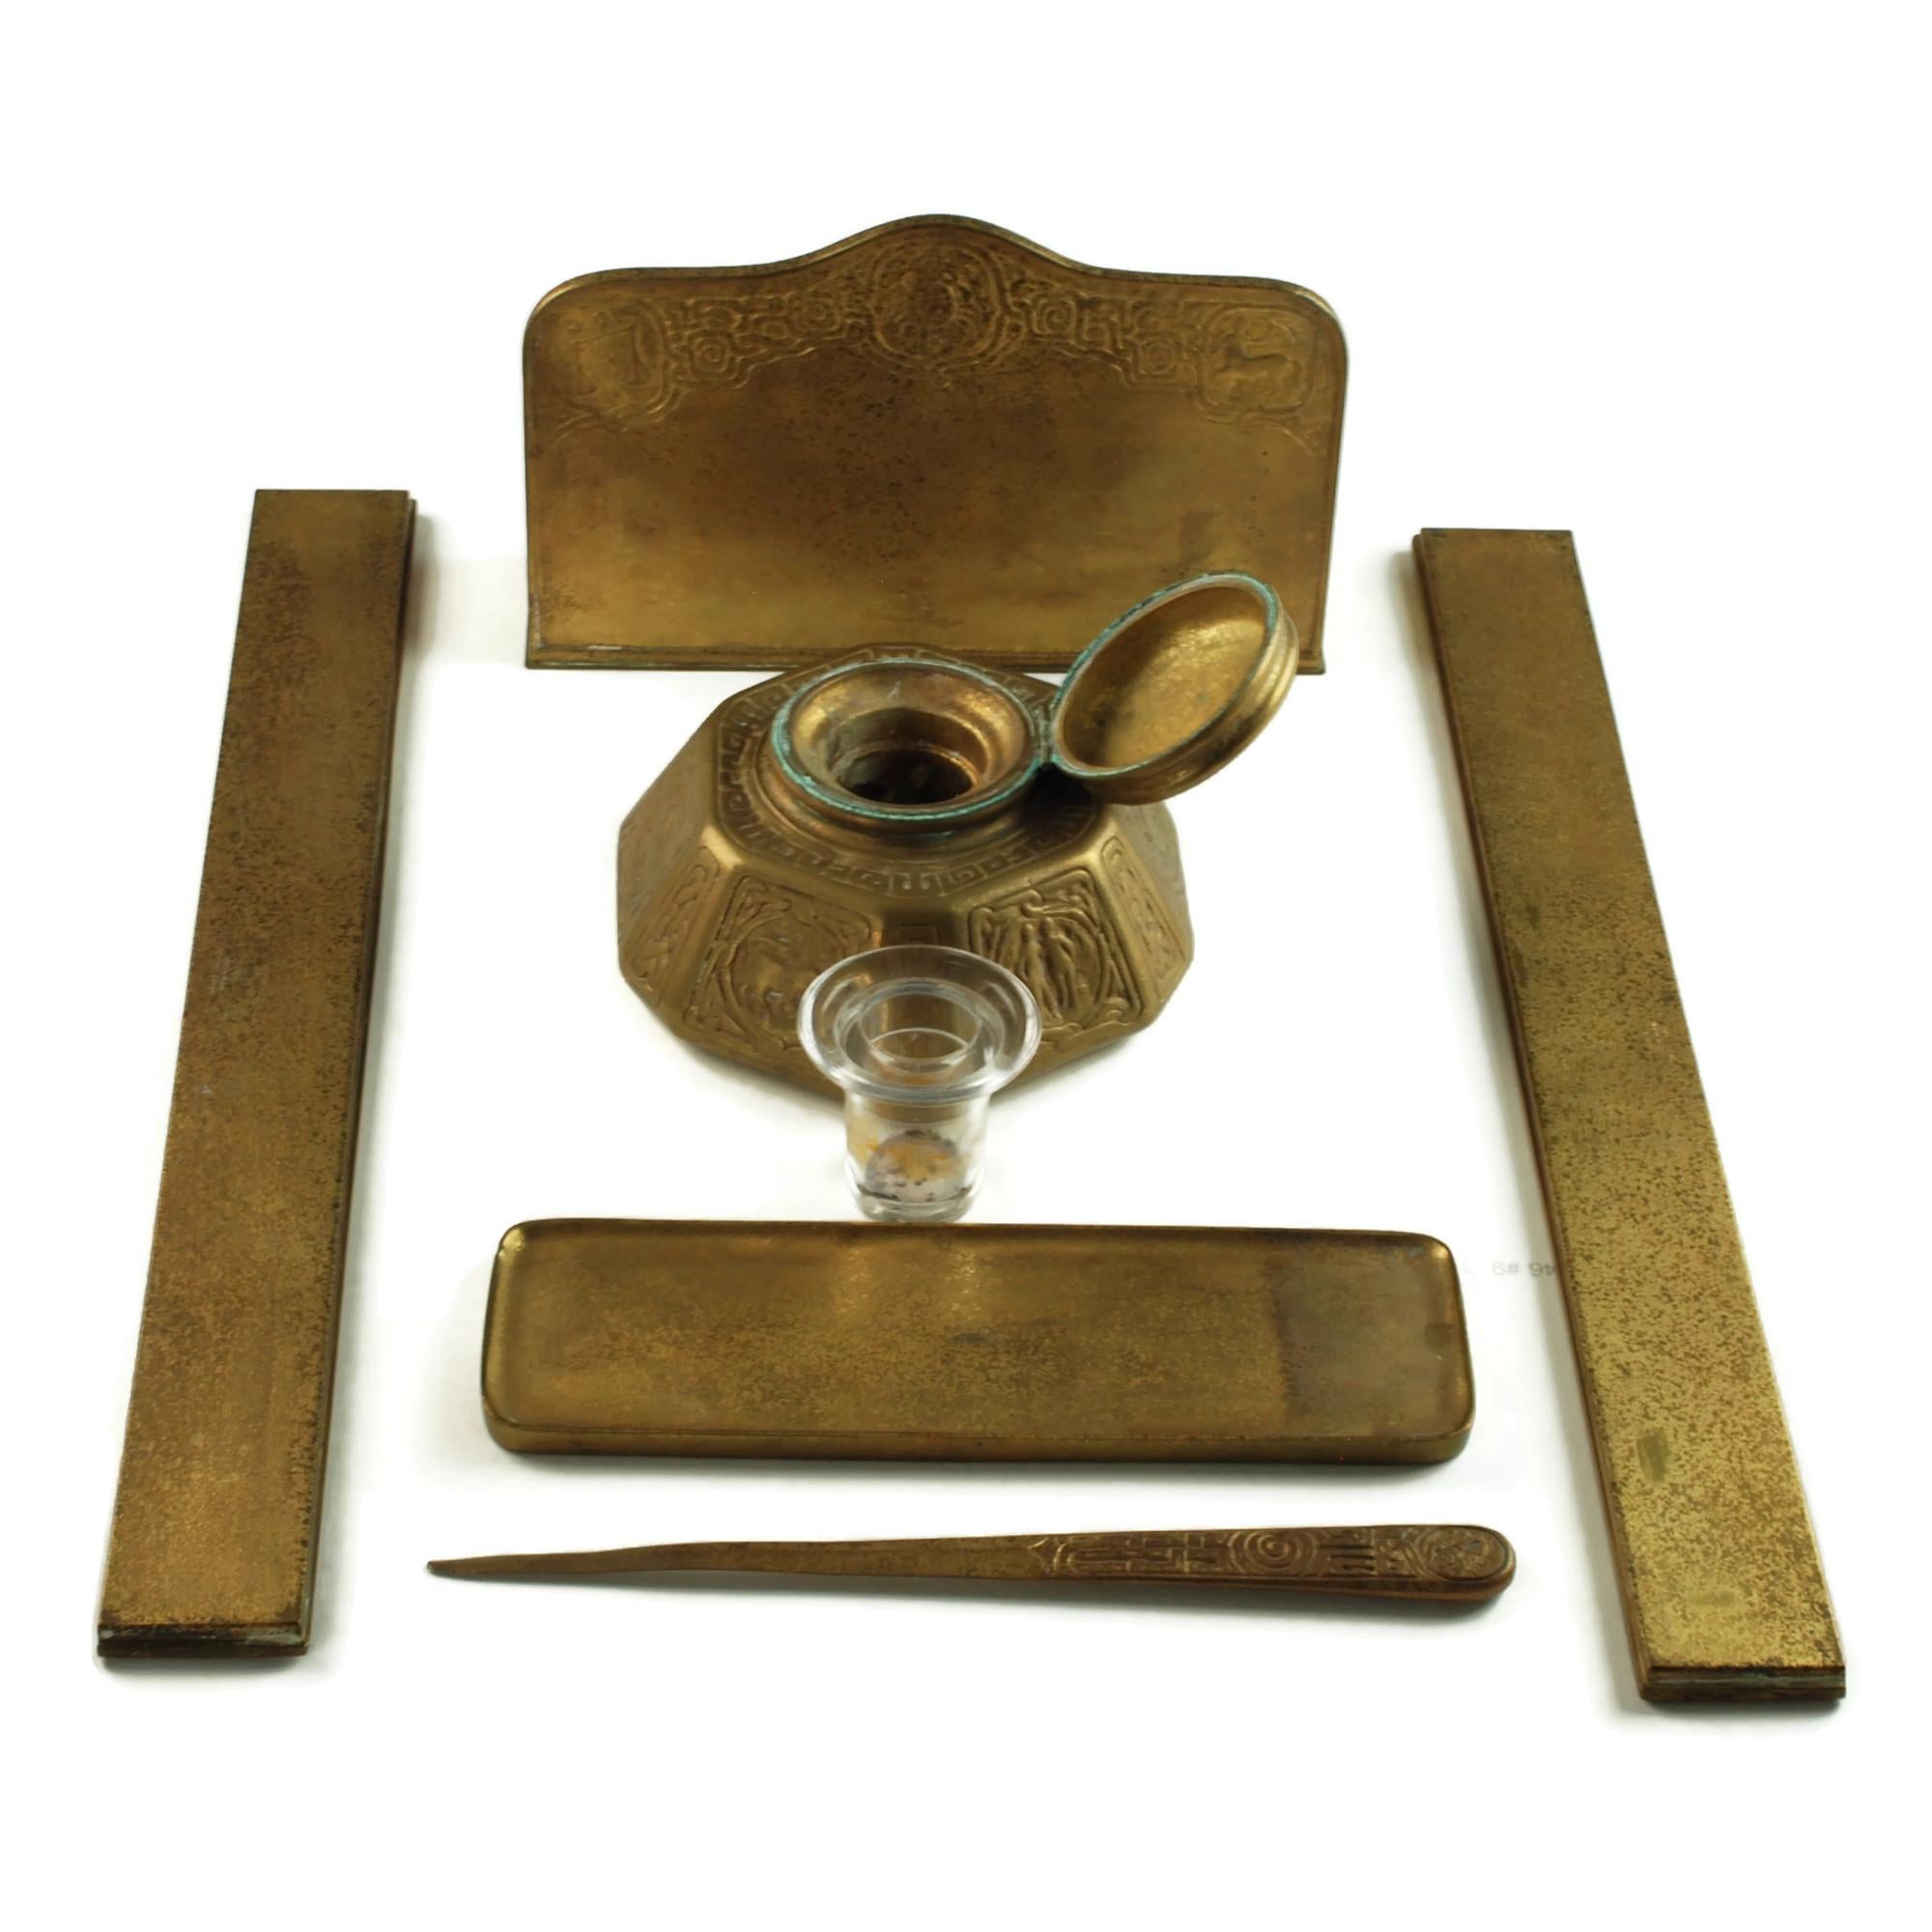 This lovely 6-piece bronze doré desk set was made by Tiffany Studios of New York.  The early 20th-century set has a warm golden finish with its original patina and has been made in Tiffany's popular Zodiac motif featuring stylized depictions of the